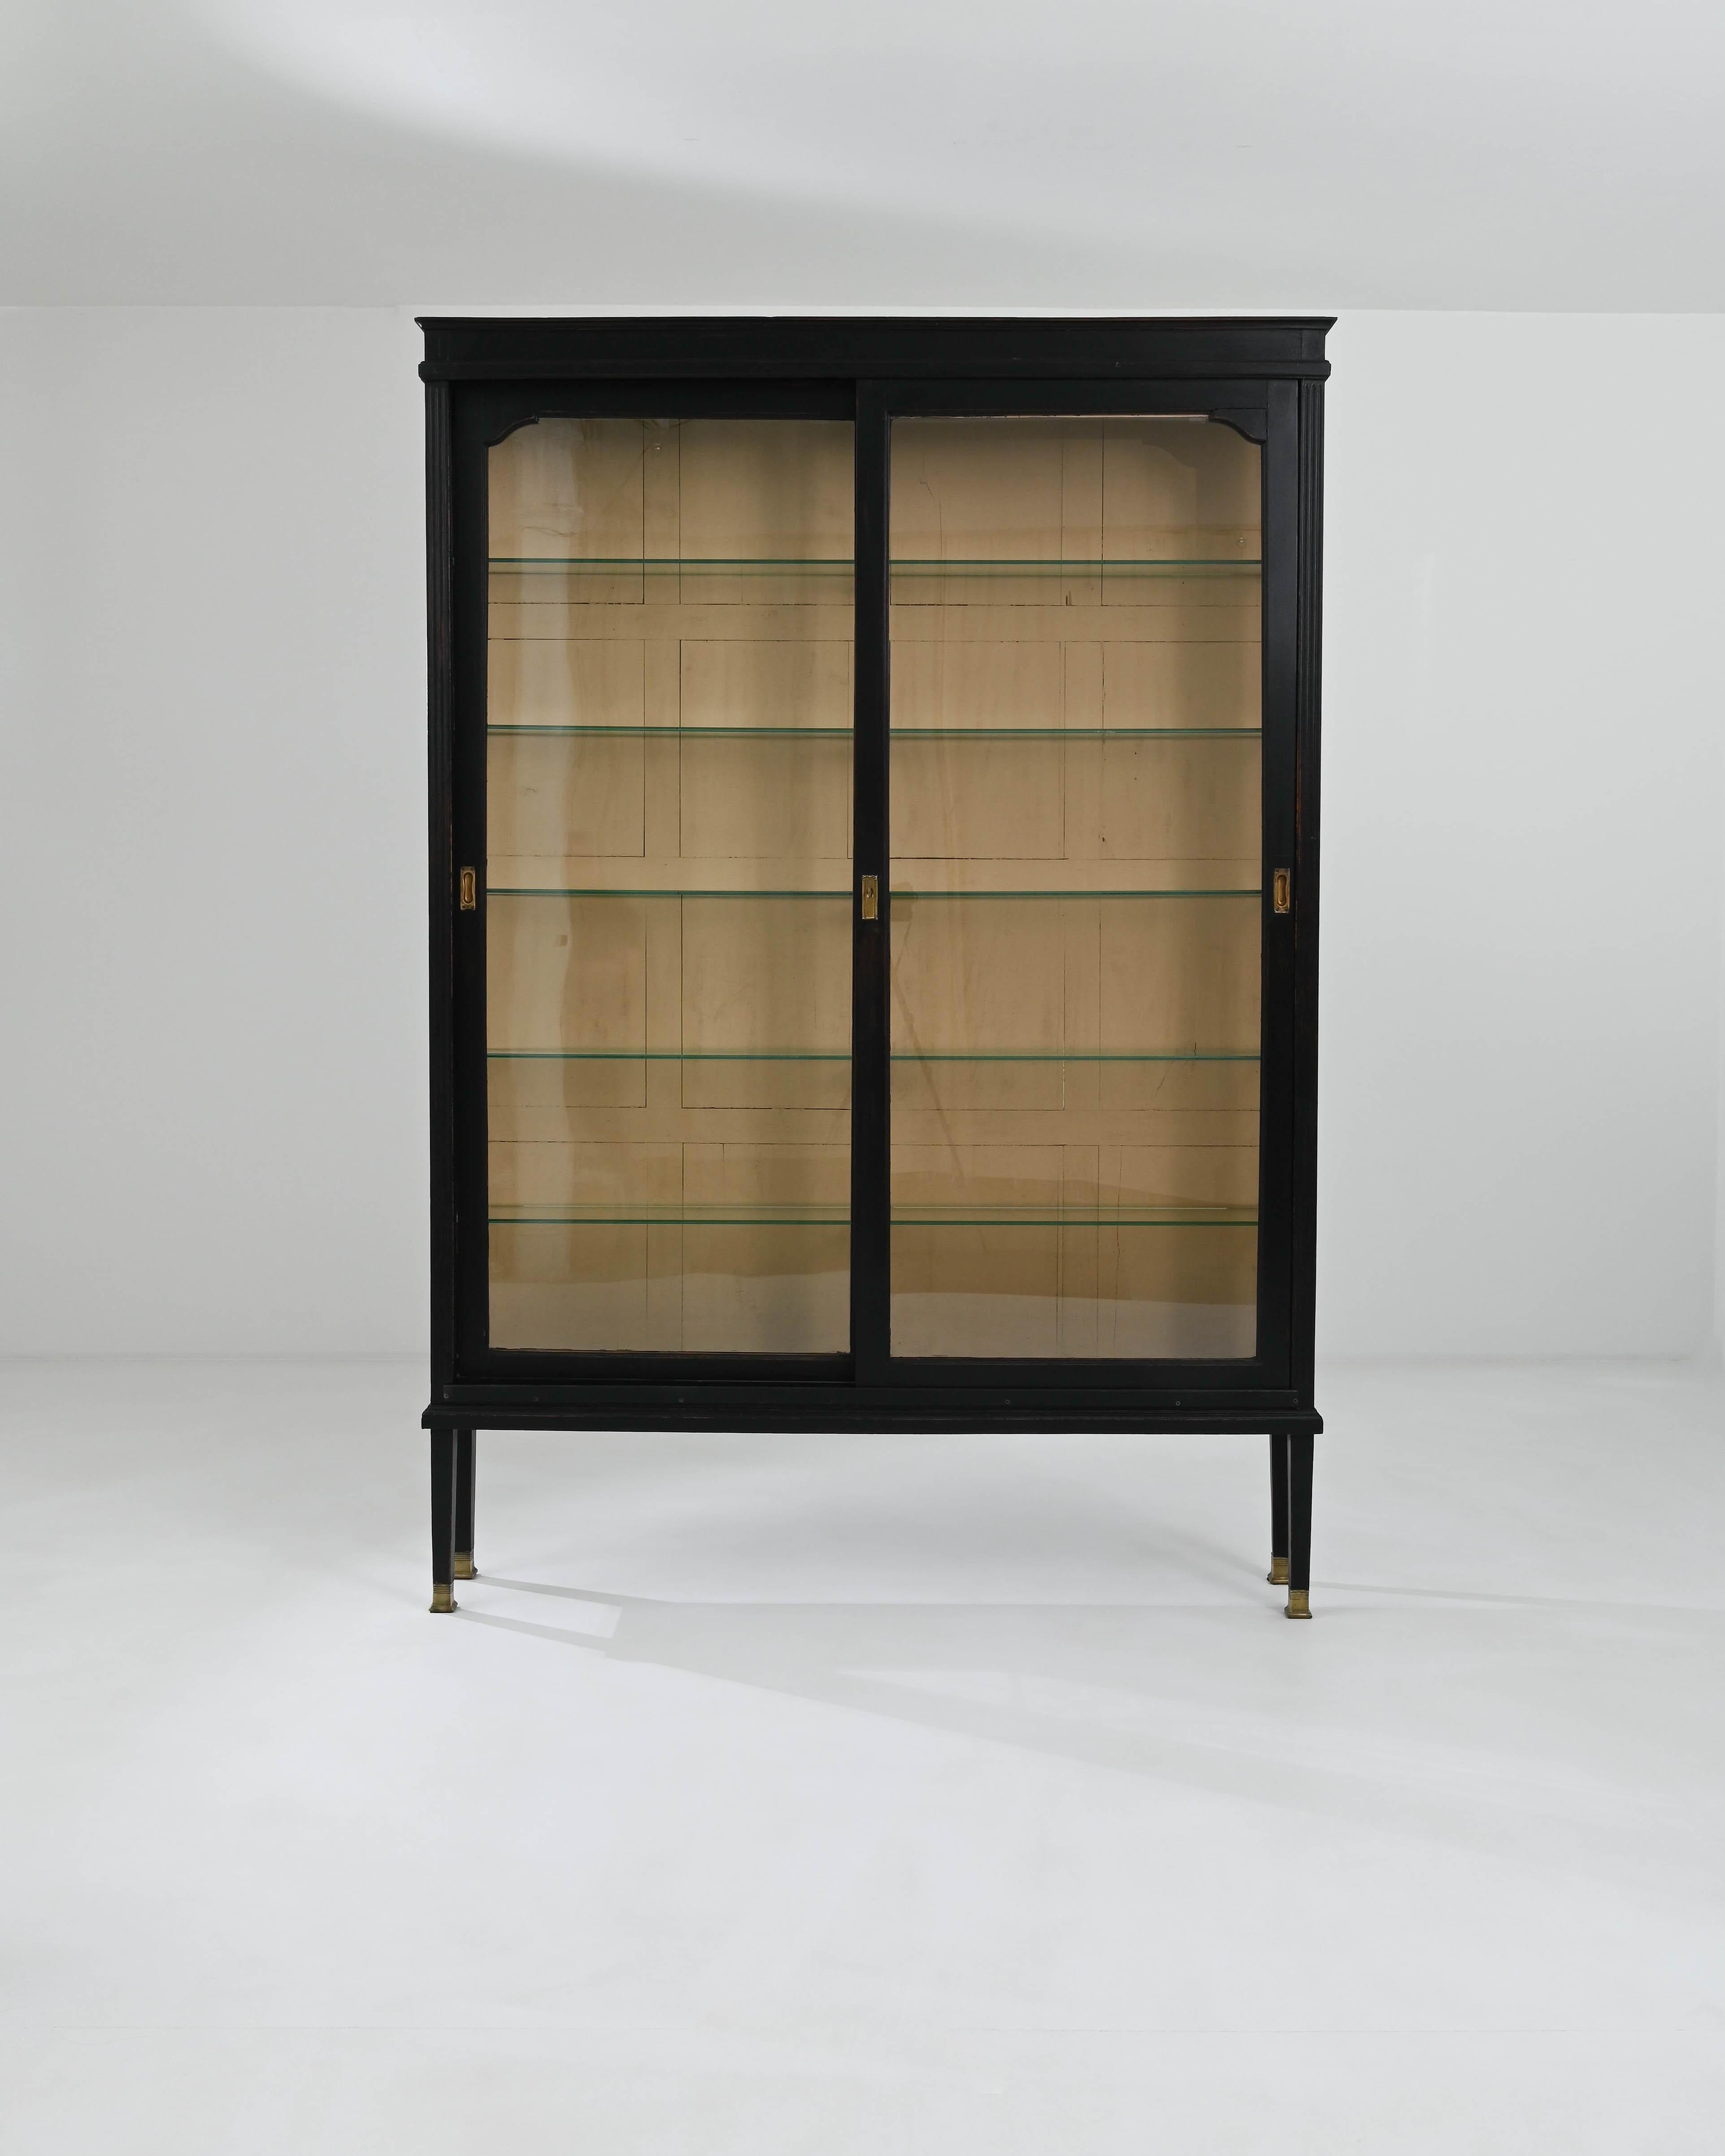 A wooden vitrine created in early 20th century France. This enormous display case proudly displays a bold sense of classic and impressive construction. An elegant glass pane slides away to reveal five spacious shelves, inviting a collection of